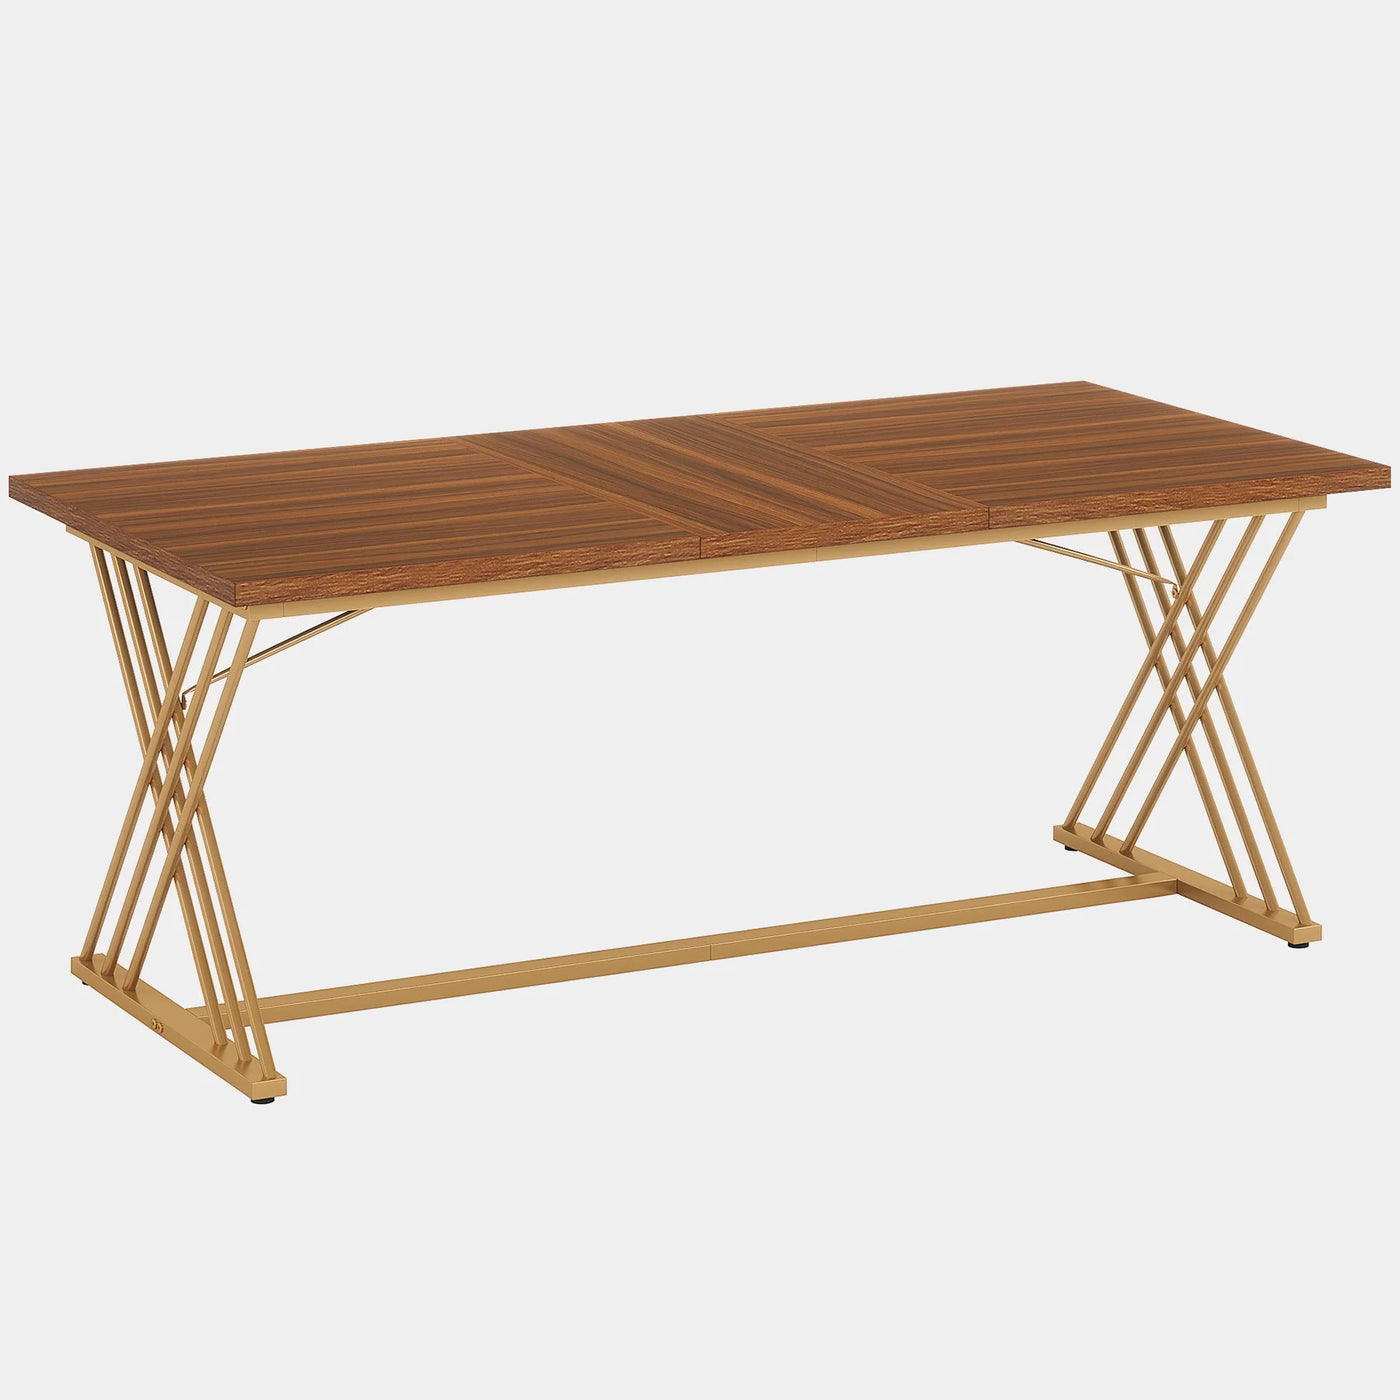 Peach 63" Dining Table Wood Kitchen Dinner Table with Gold Metal Frame